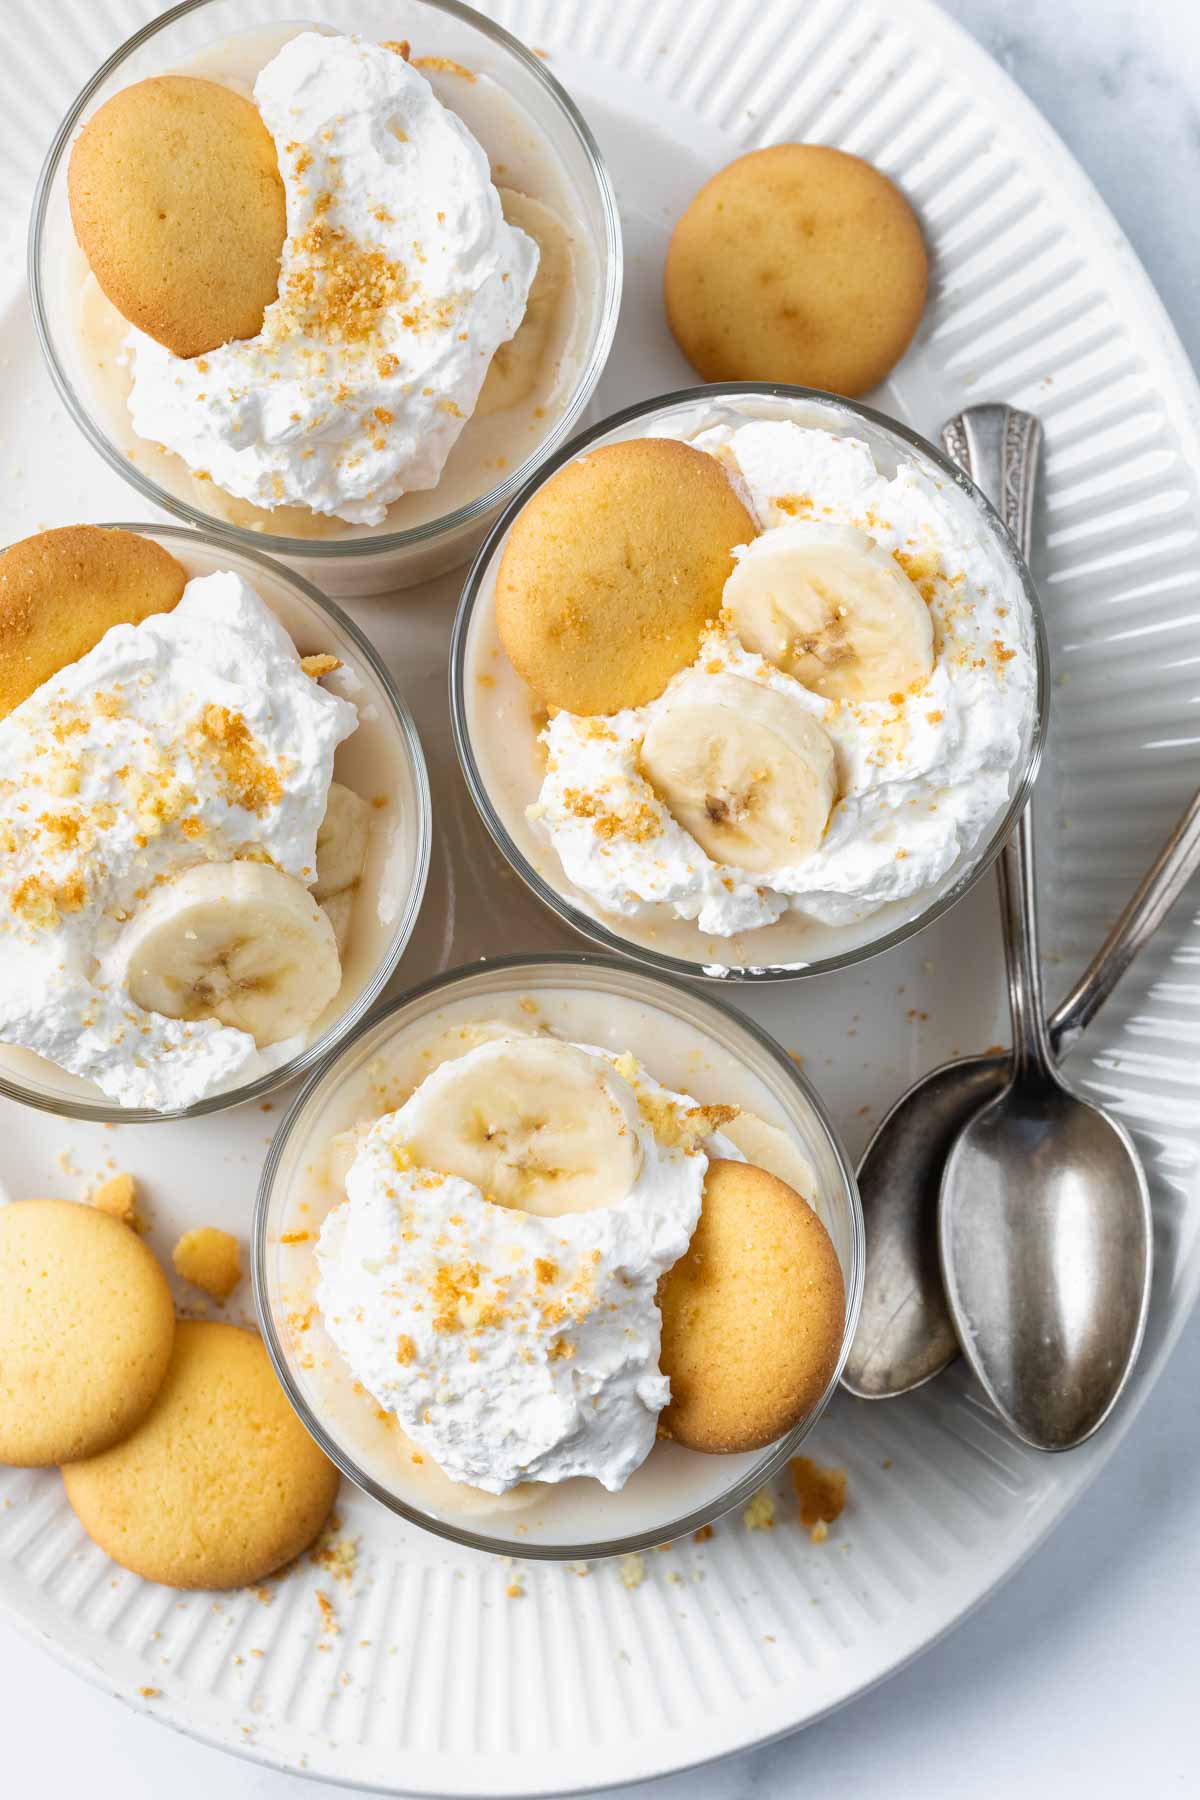 finished banana pudding on white plate with spoons